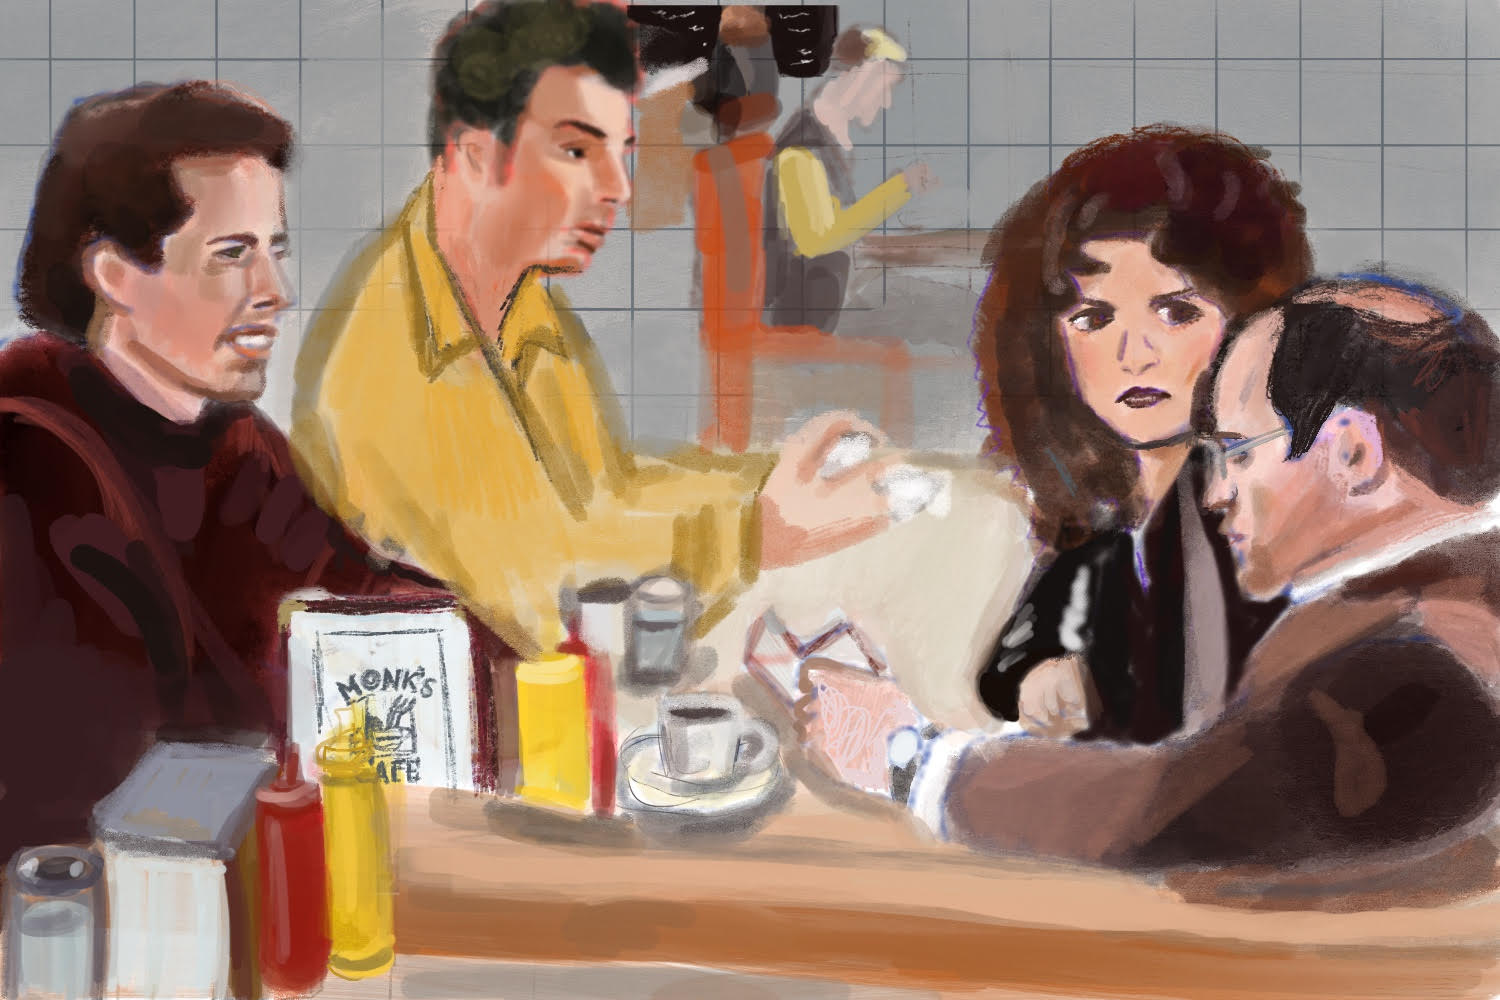 Review: Checking in on the “Seinfeld” Diner 21 Years Later